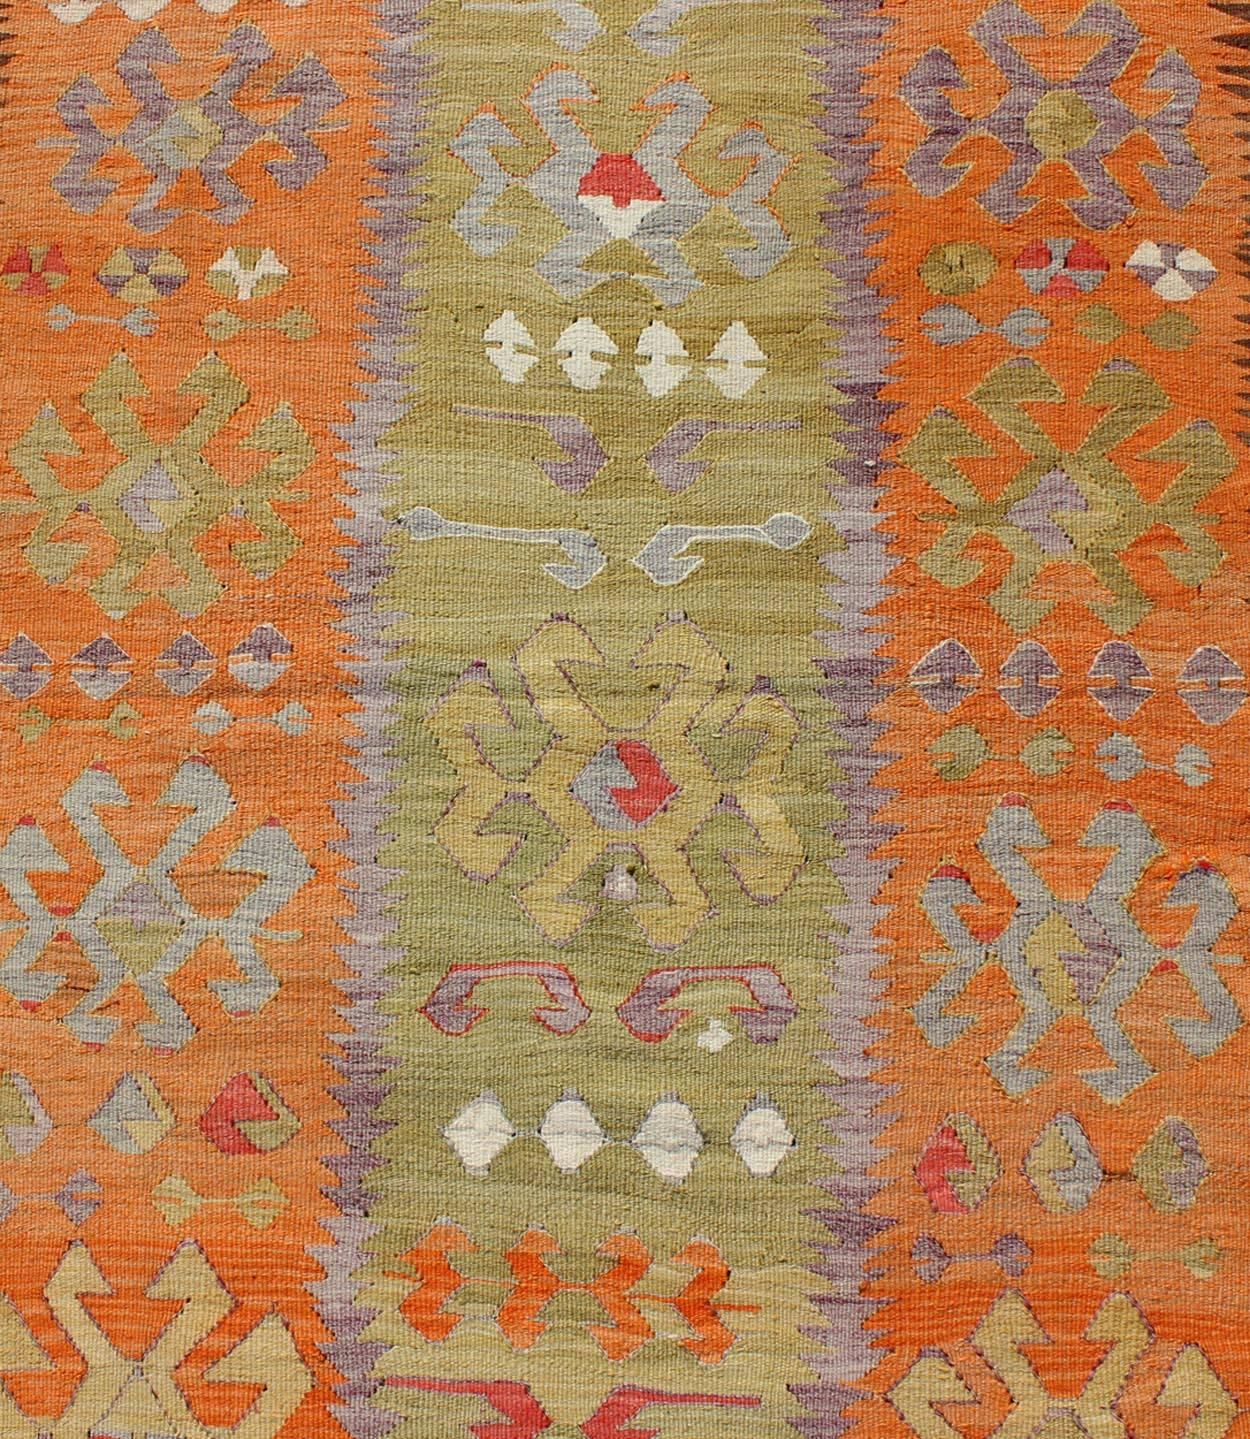 Wool Long Kilim Runner with Tribal Design in Citron Green, Red and Orange